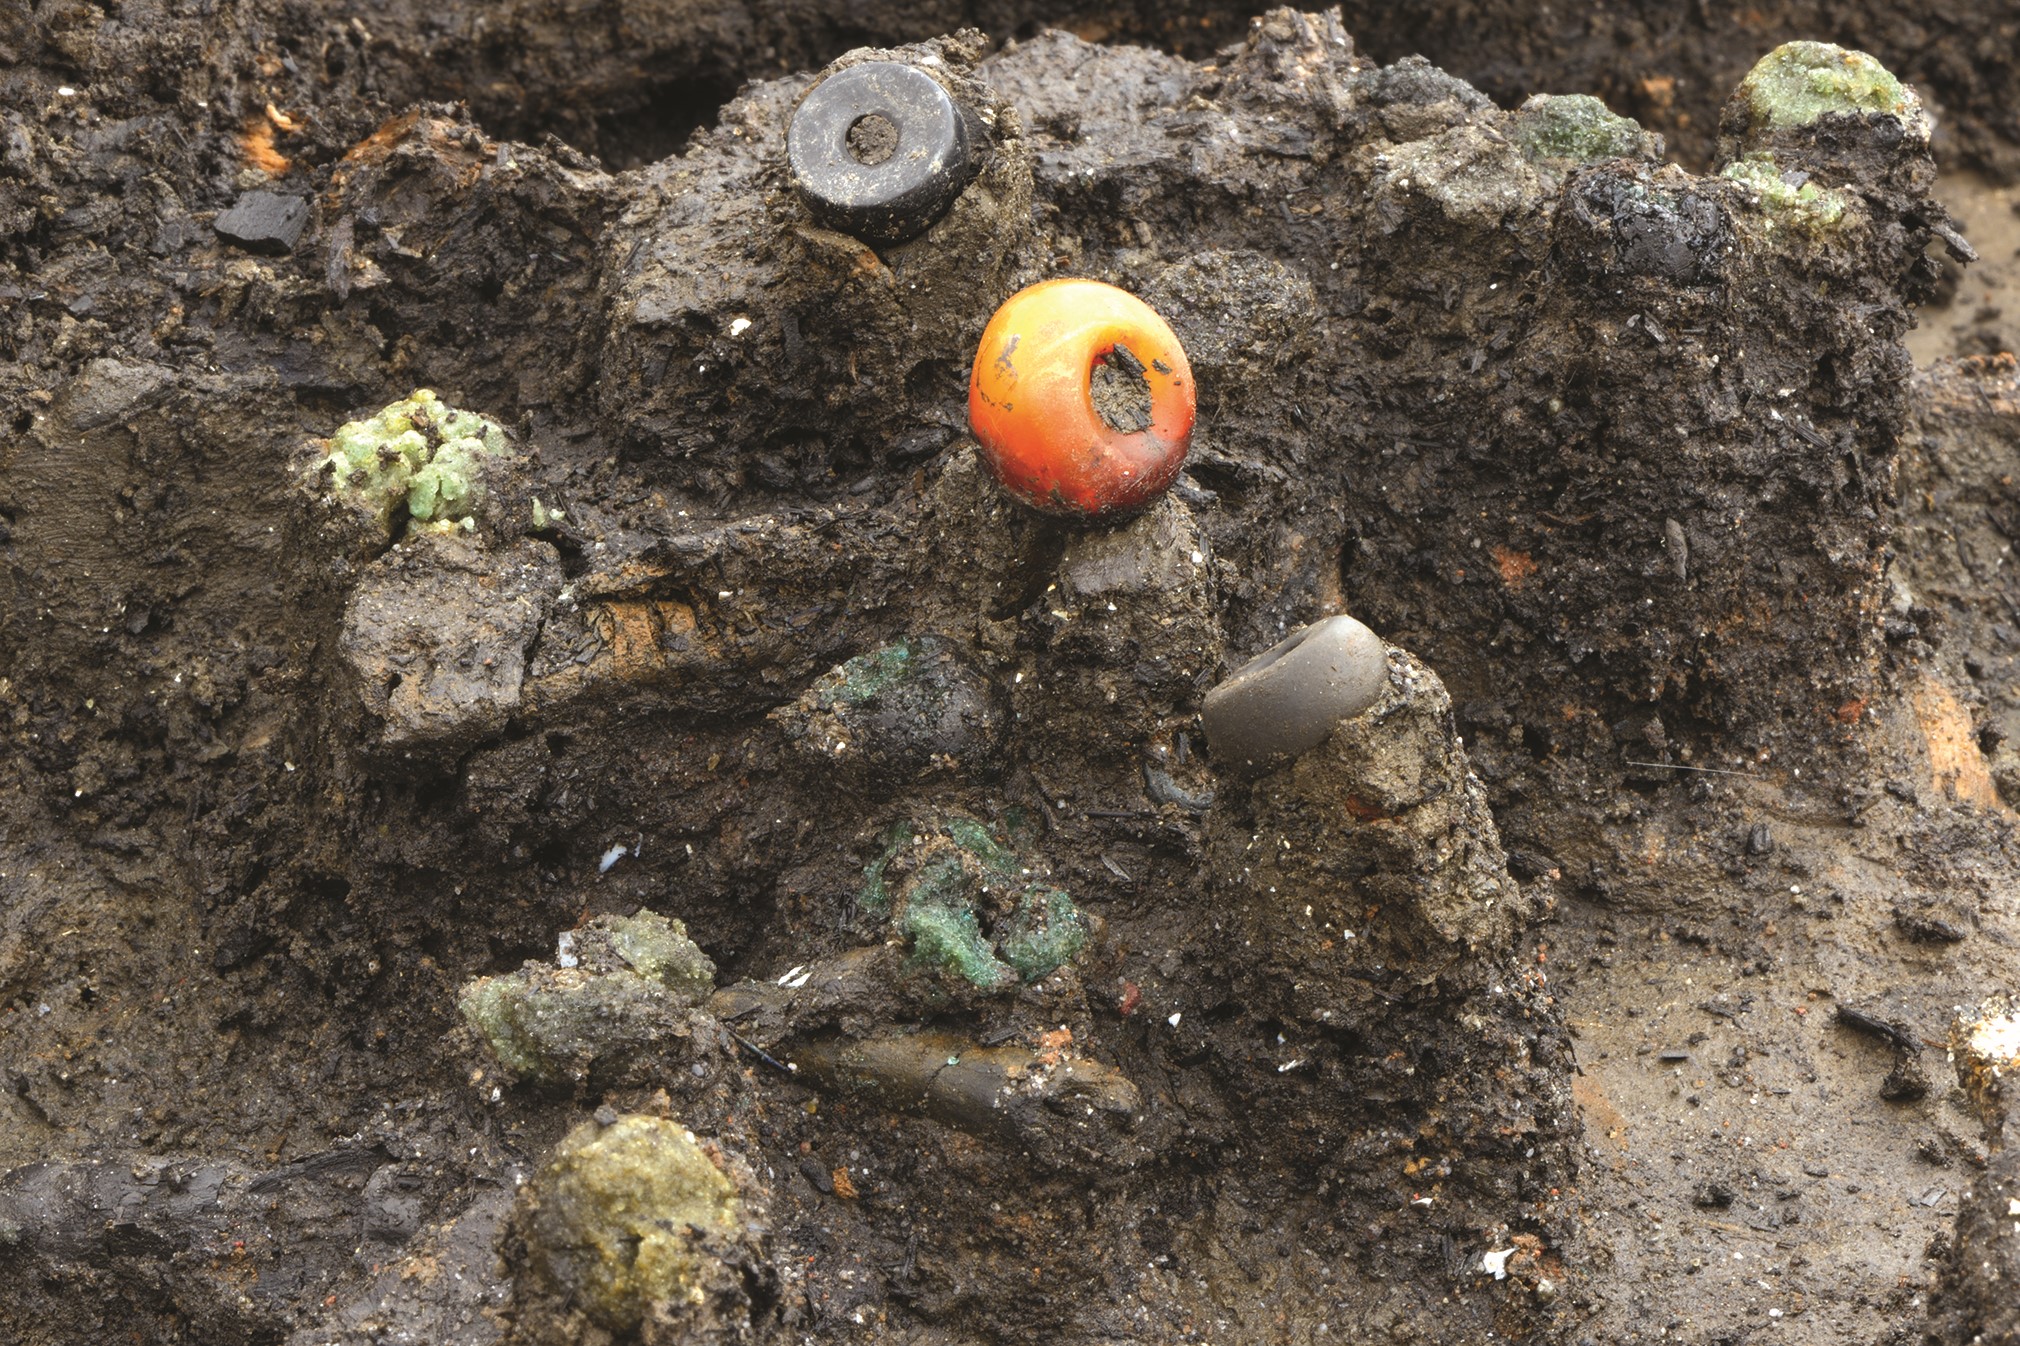 Two beads - one large orange bead and a small grey bead - seen in the ground at Must Farm